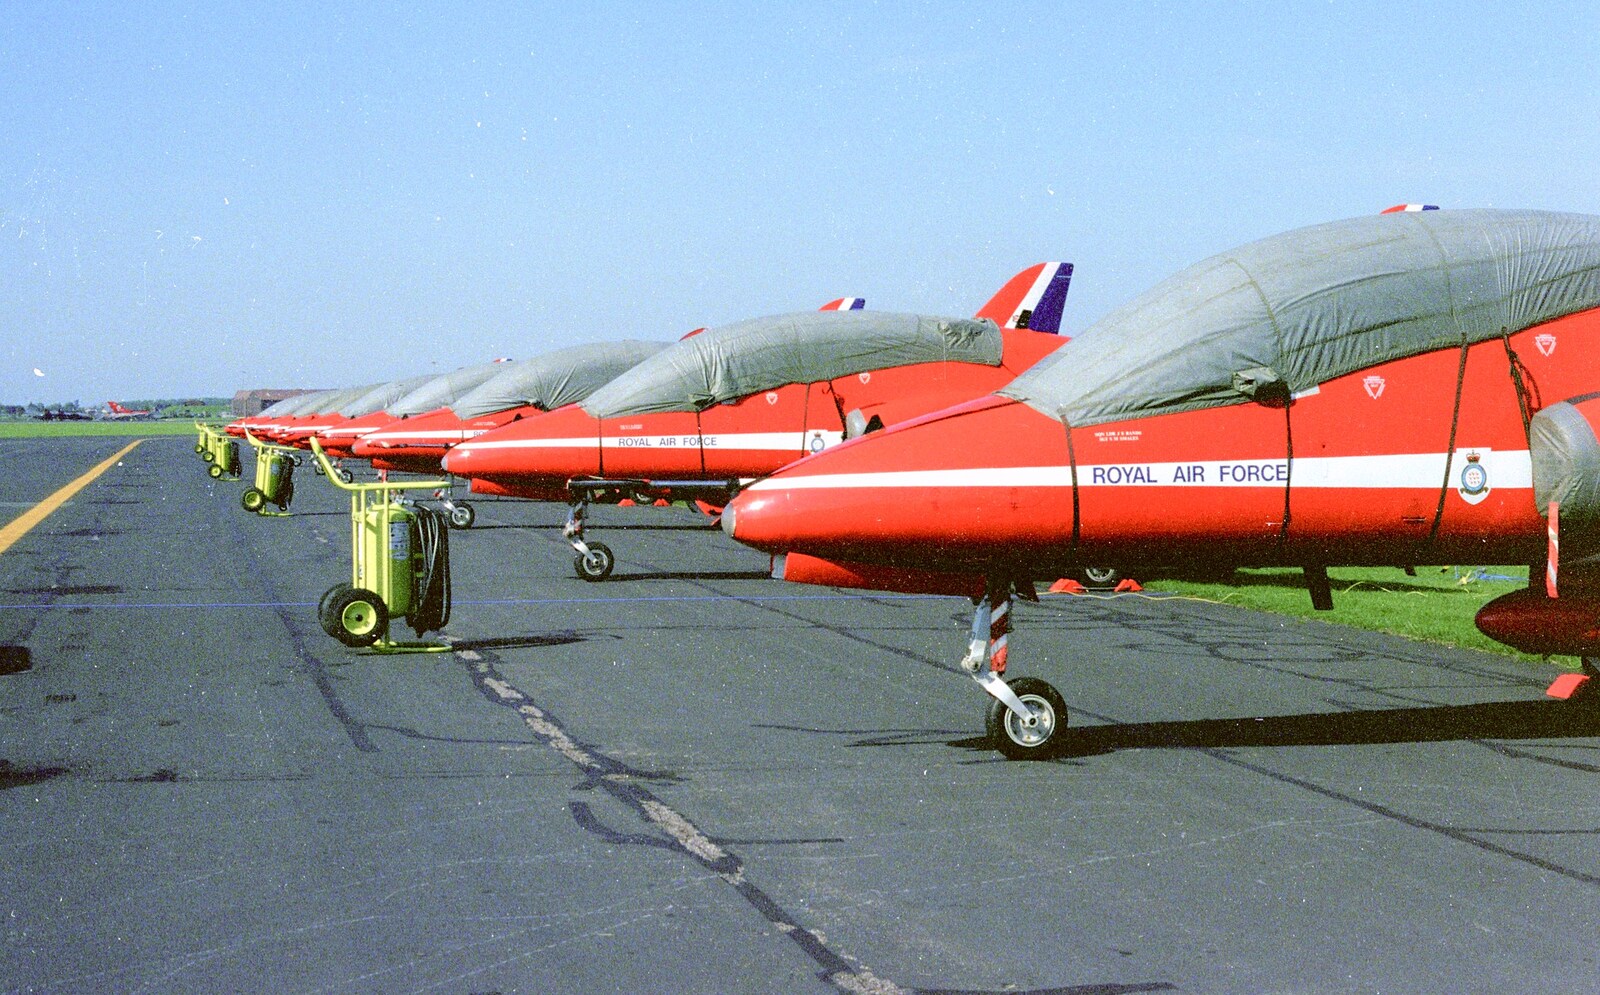 The Red Arrows are parked and rugged up from The Mildenhall Air Fete, Mildenhall, Suffolk - 29th May 1994